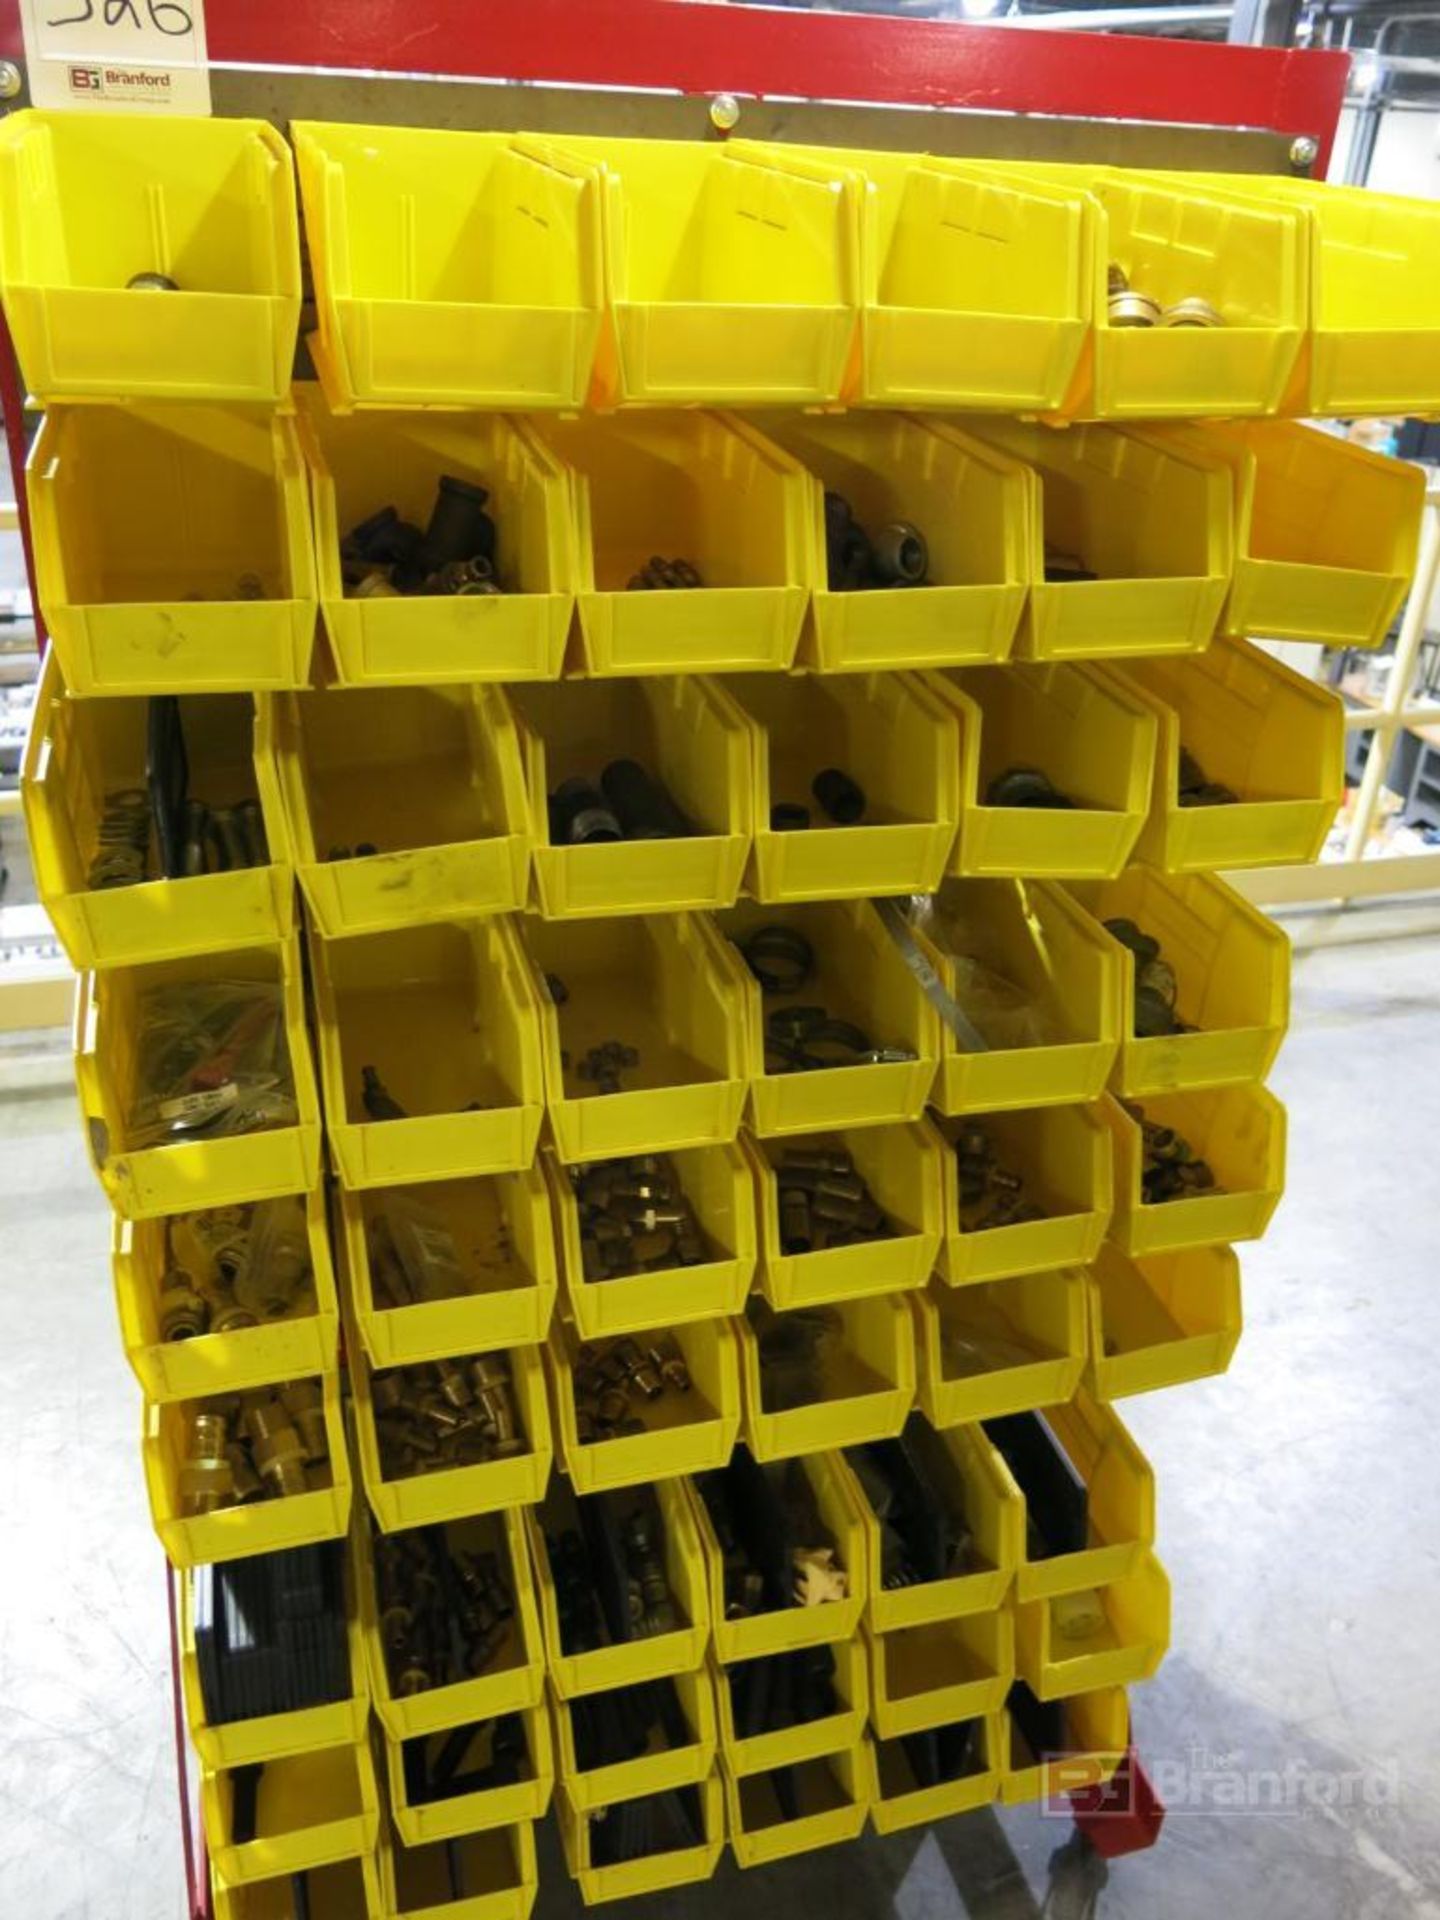 Double Sided Castered Arco Bin Rack w/ Contents - Image 3 of 3